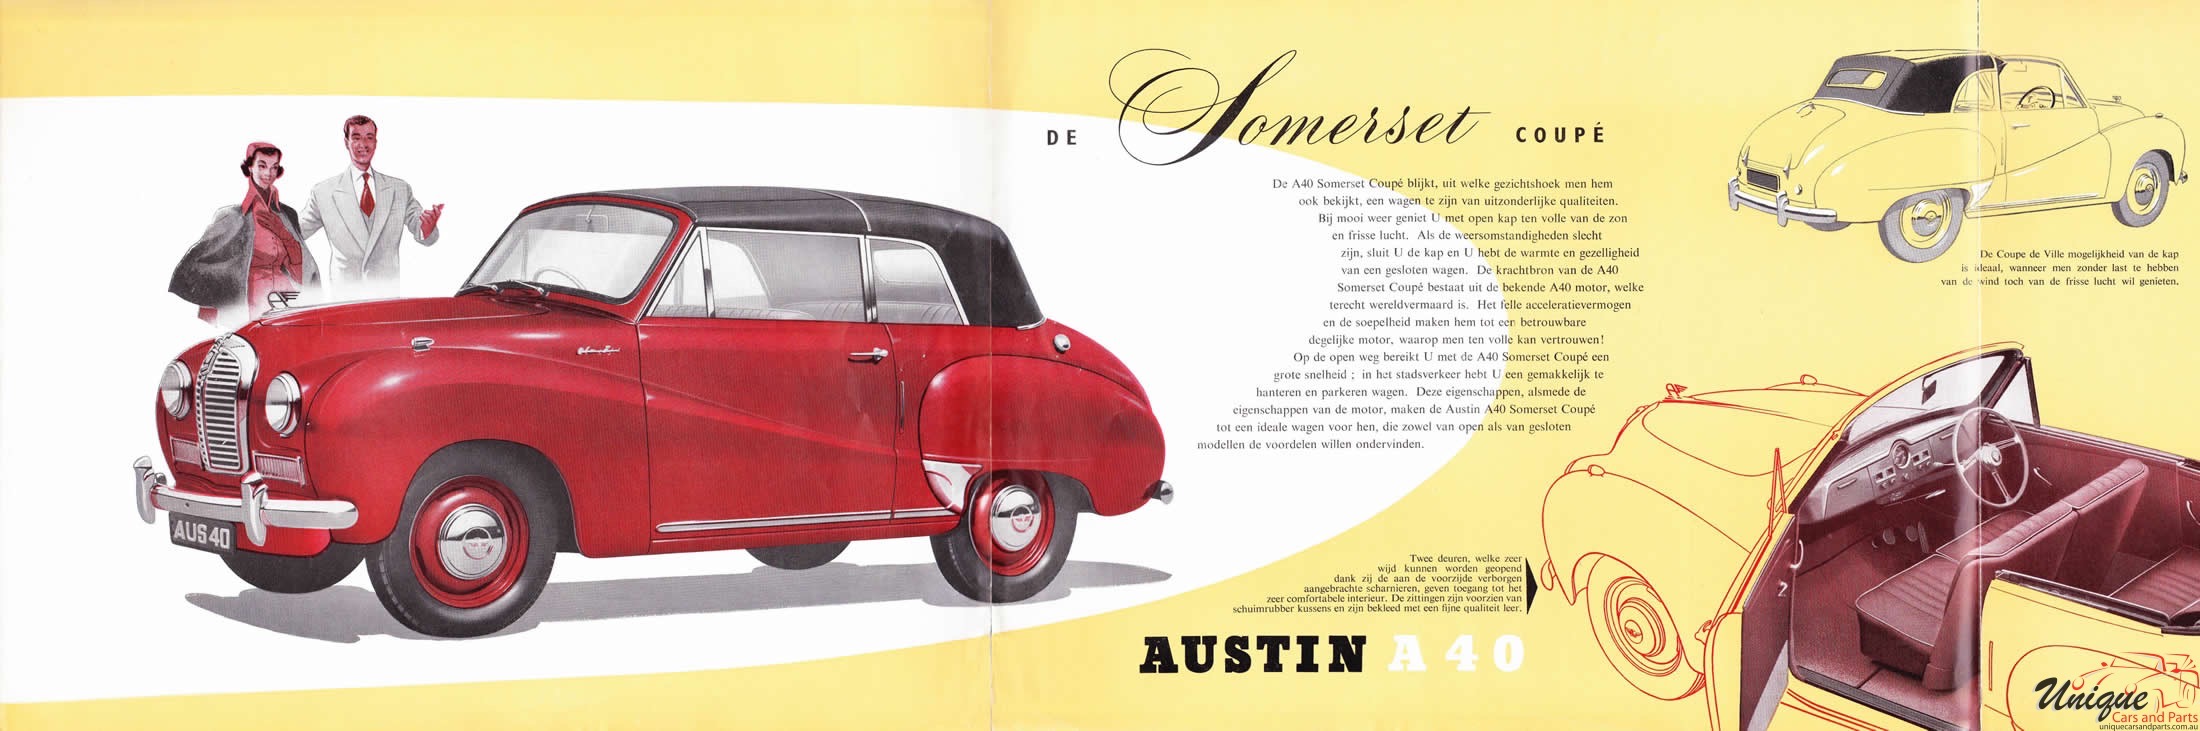 1950 Austin A40 Somerset Coupe Brochure Page 5